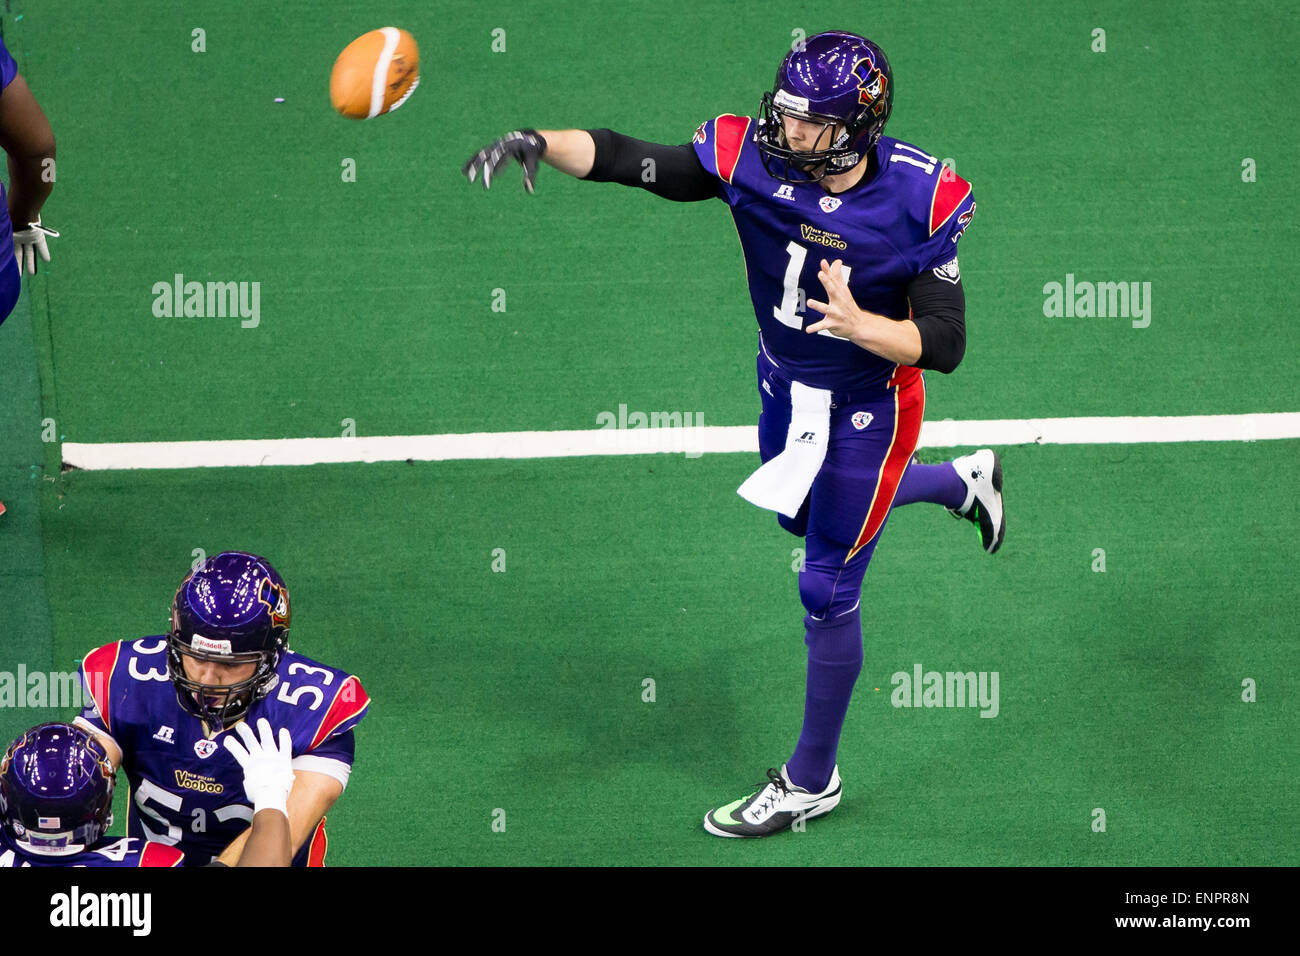 New Orleans, LA, USA. 9th May, 2015. New Orleans VooDoo qb Sam Durley (11) during the game between the Arizona Rattlers and New Orleans VooDoo at Smoothie King Center in New Orleans, LA. Arizona Rattlers defeated New Orleans VooDoo 47-39. Stephen Lew/CSM/Alamy Live News Stock Photo